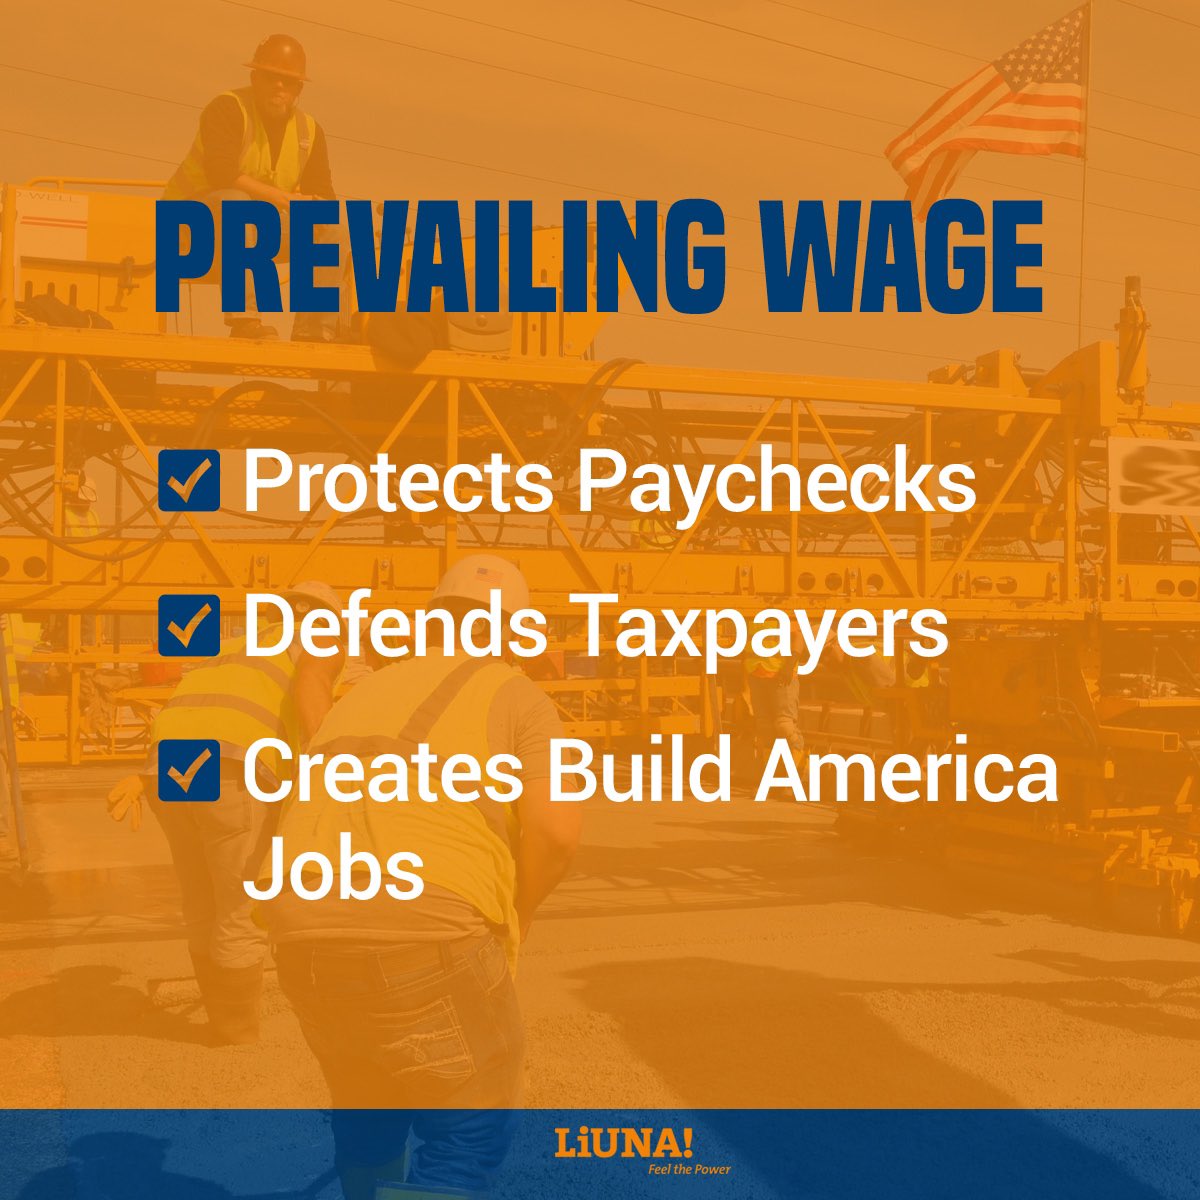 Be in the know. Membership meets this Thursday! #prevailingwage #protectprevailingwage #wages
#LIUNABuilds #FeelthePower #construction